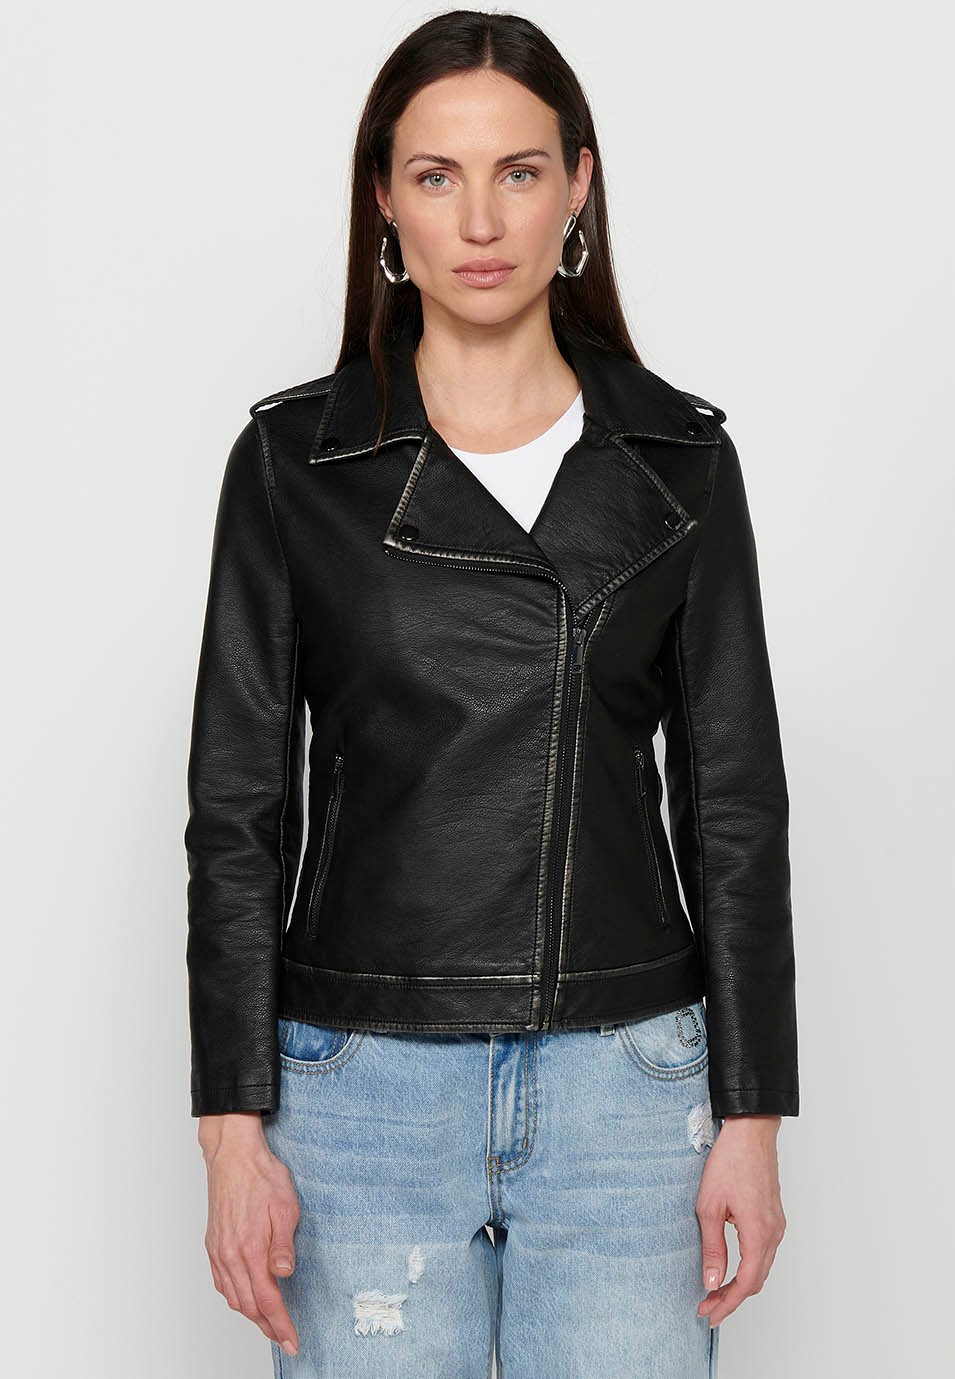 Leather-effect double-breasted jacket with lapel collar and front zipper closure in Black for Women